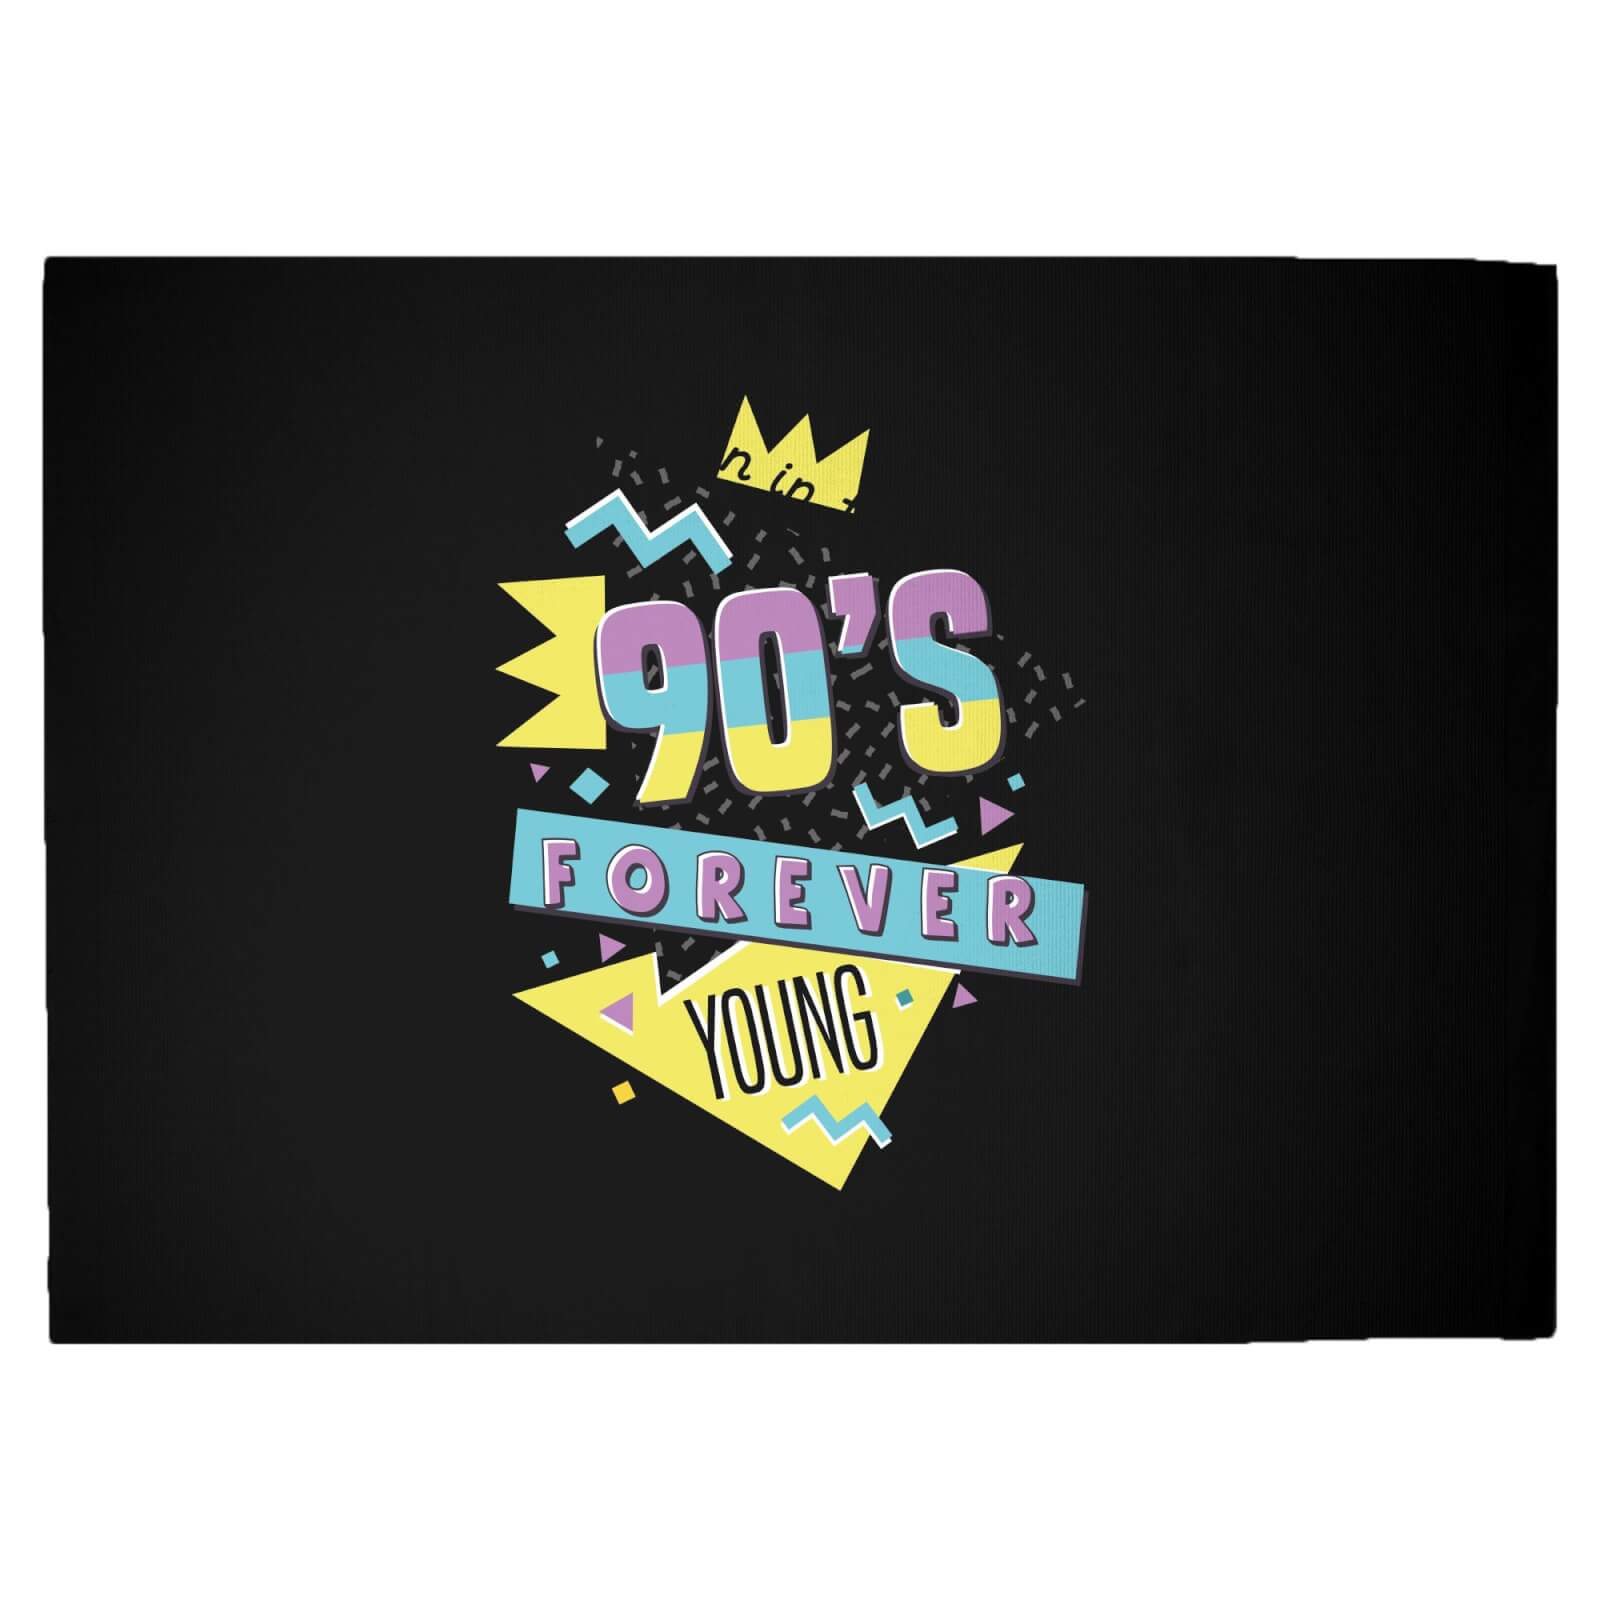 Born In The 90s Forever Young Graphic Woven Rug - Large